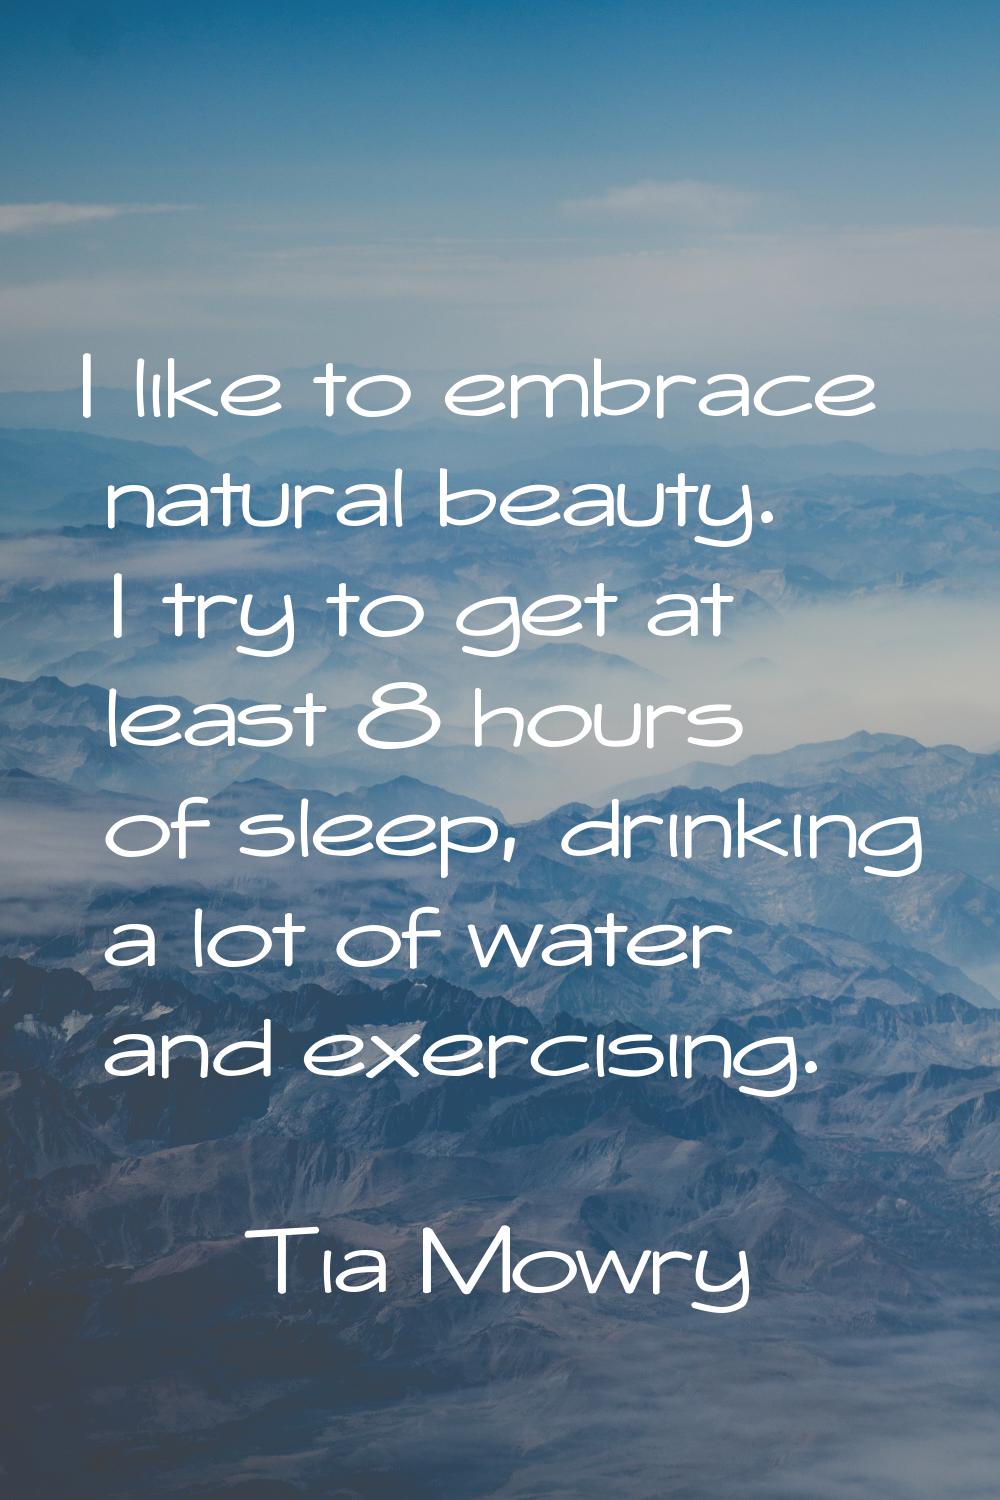 I like to embrace natural beauty. I try to get at least 8 hours of sleep, drinking a lot of water a